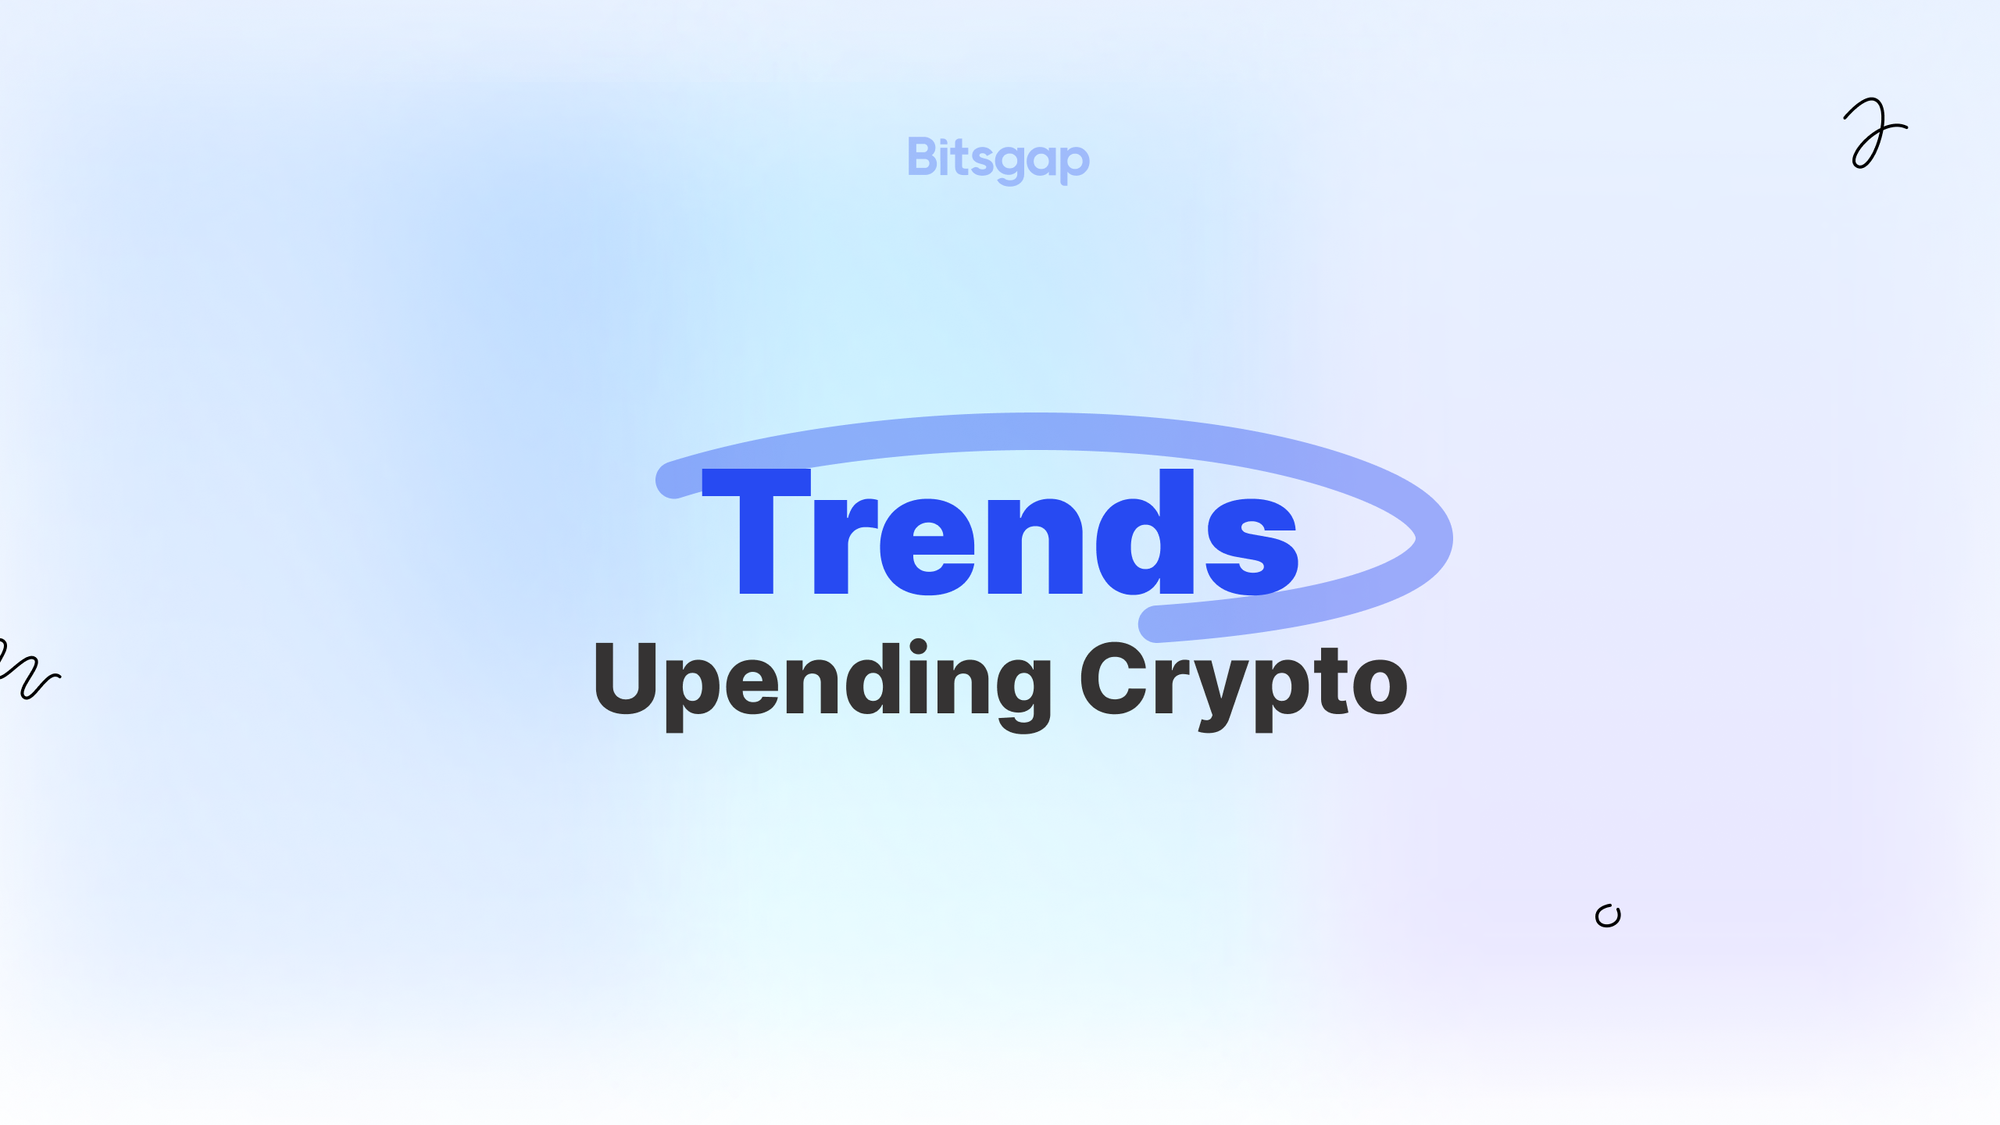 What Technology Trends Are Shaping the Future of Cryptocurrencies